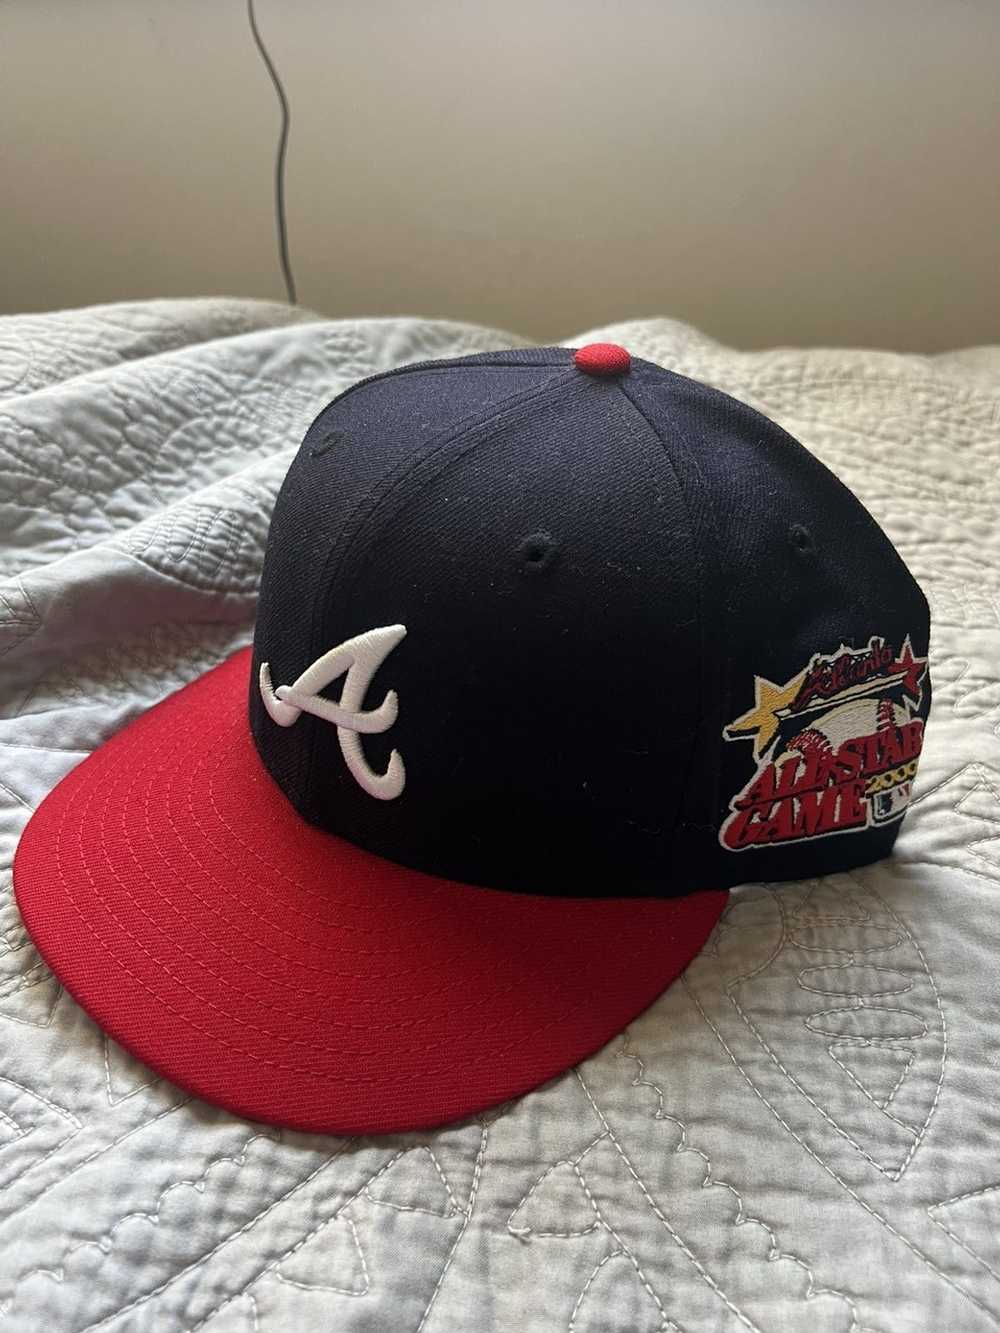 Lids - Just arrived! The New Era Cap Atlanta Braves World Series Champions  Side Patch 59FIFTY is now available. In select stores and online. Details:   #ForTheA